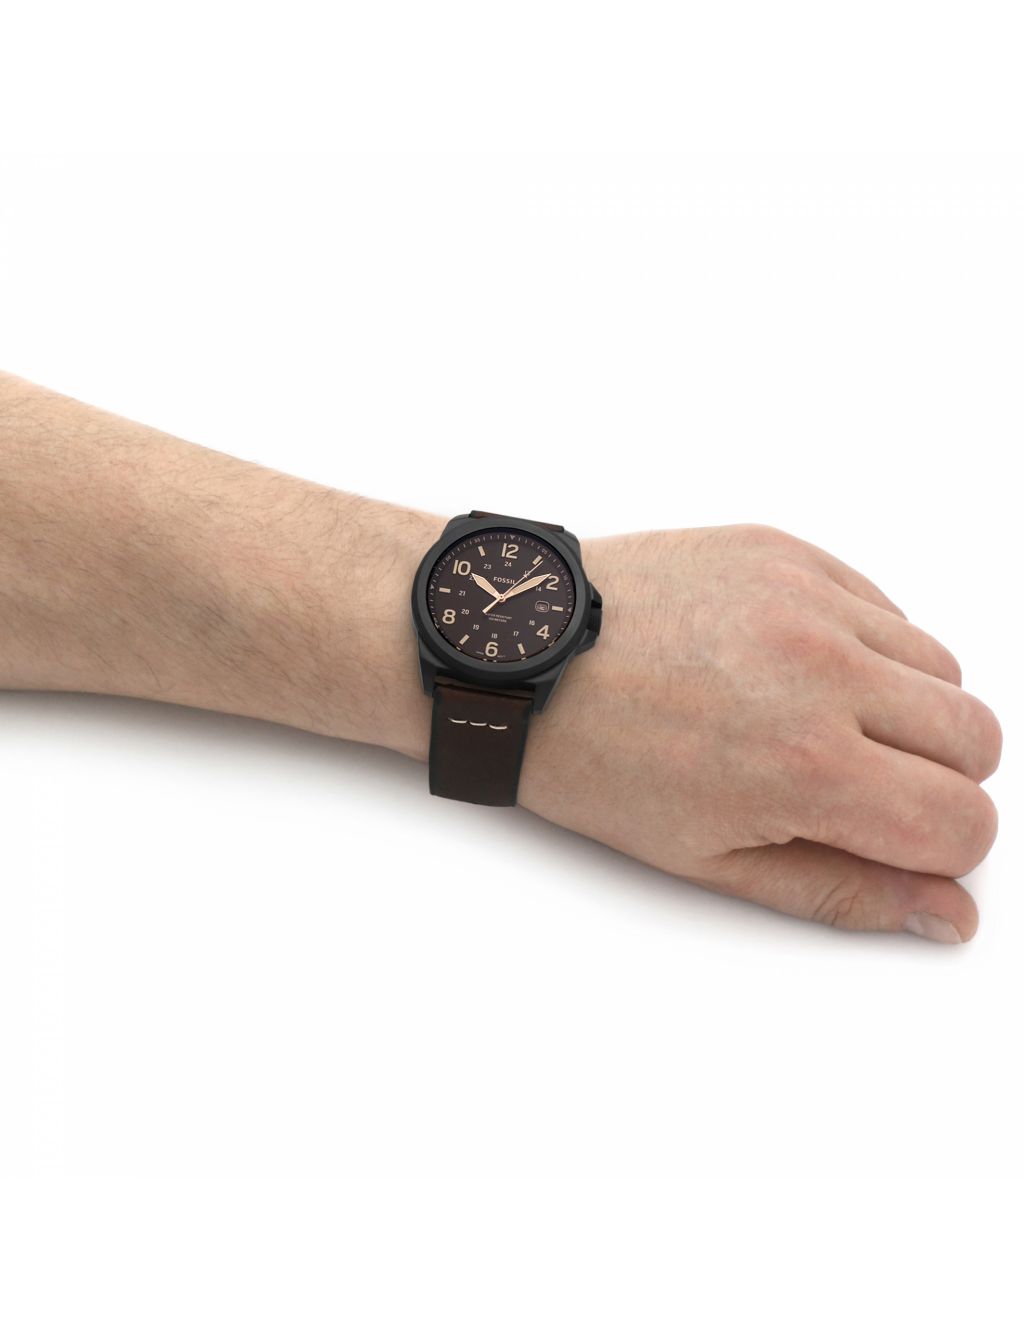 Fossil Bronson Brown Leather Watch image 4